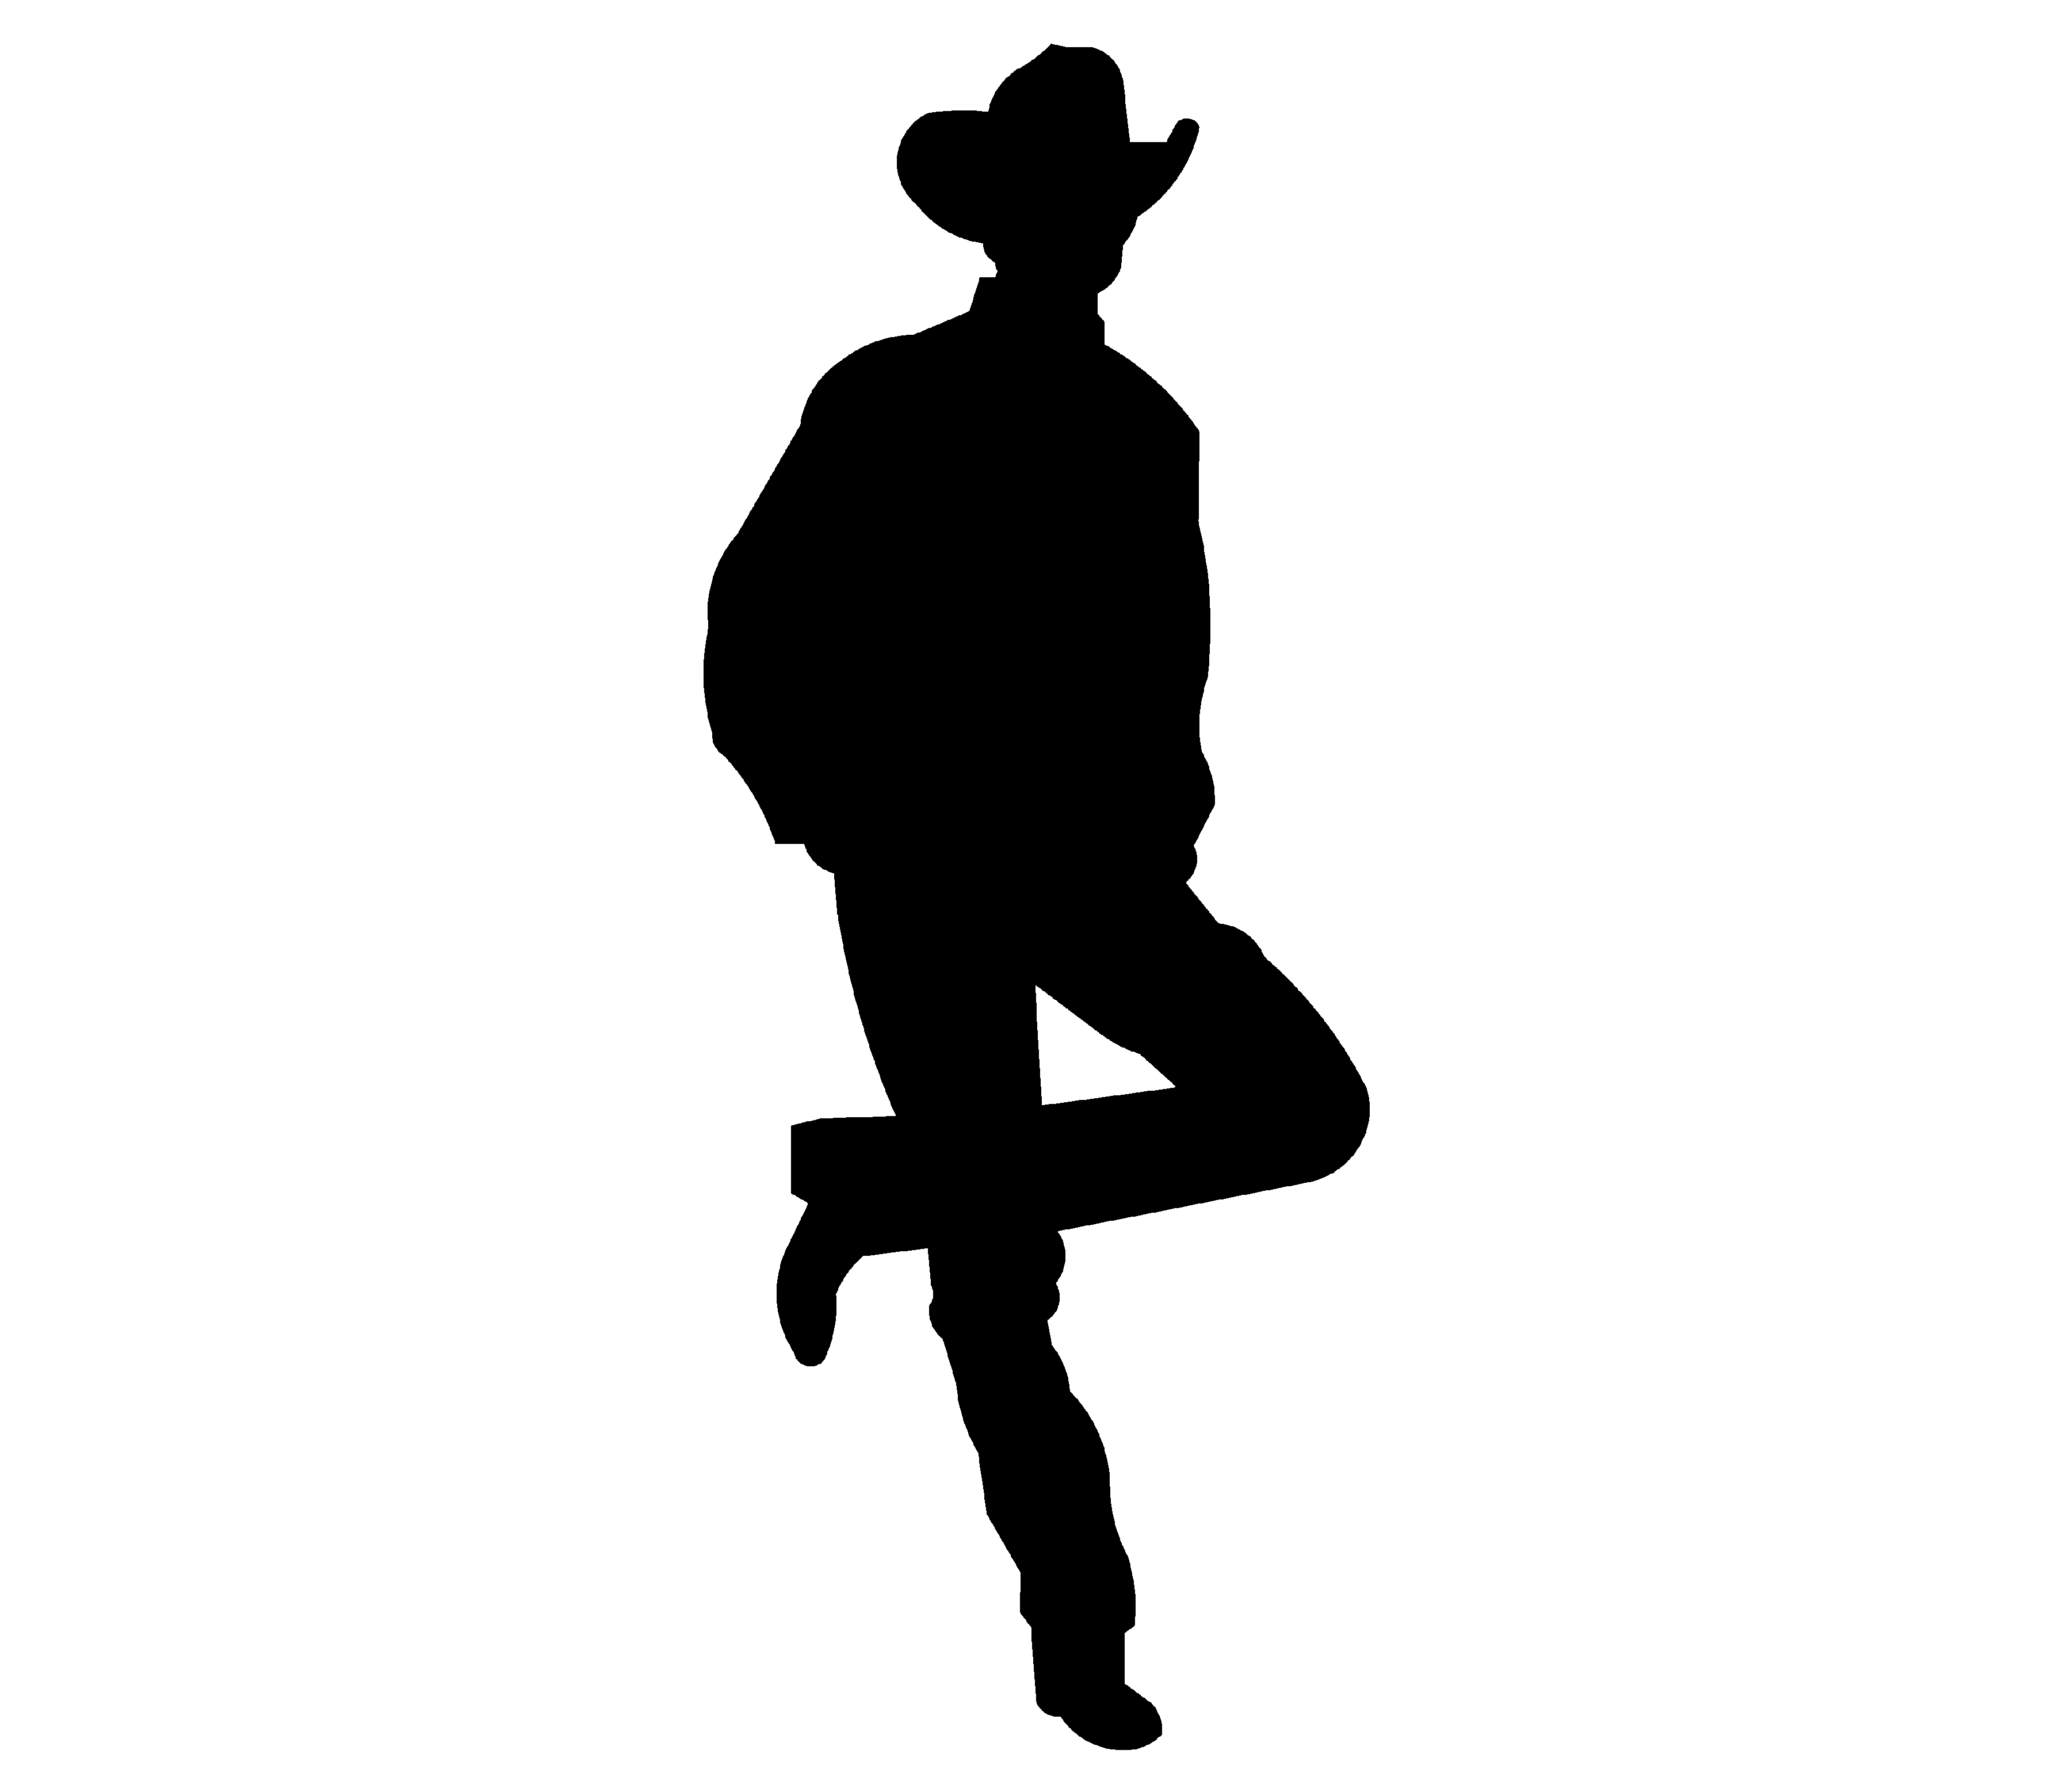 Leaning Cowboy Silhouette Vector | picturespider.com